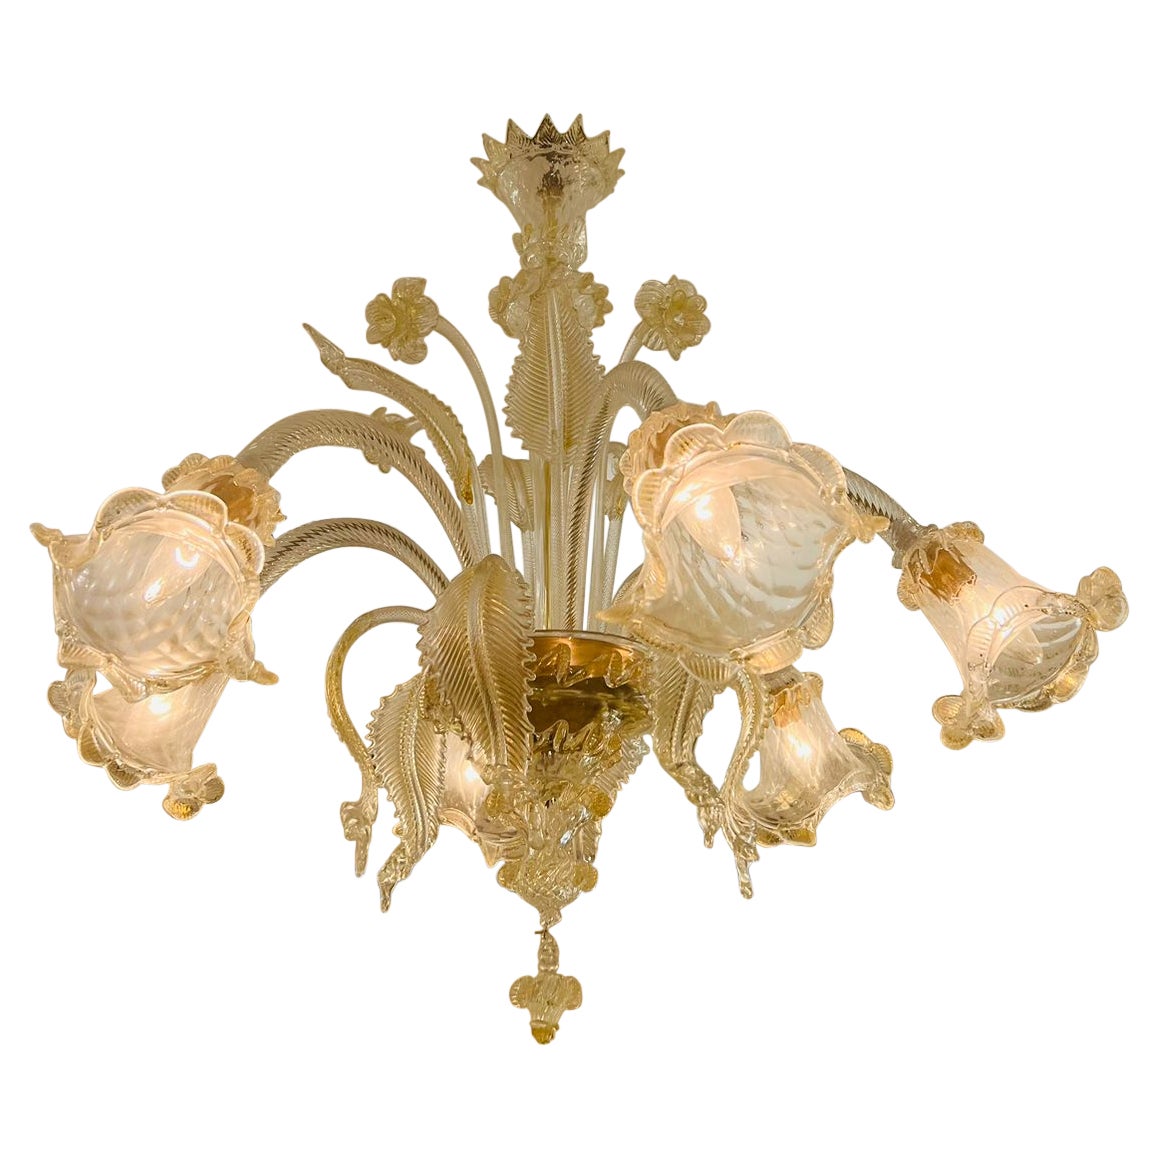 Barovier&Toso Murano glass Pair (2) chandeliers with gold and flowers circa 1950